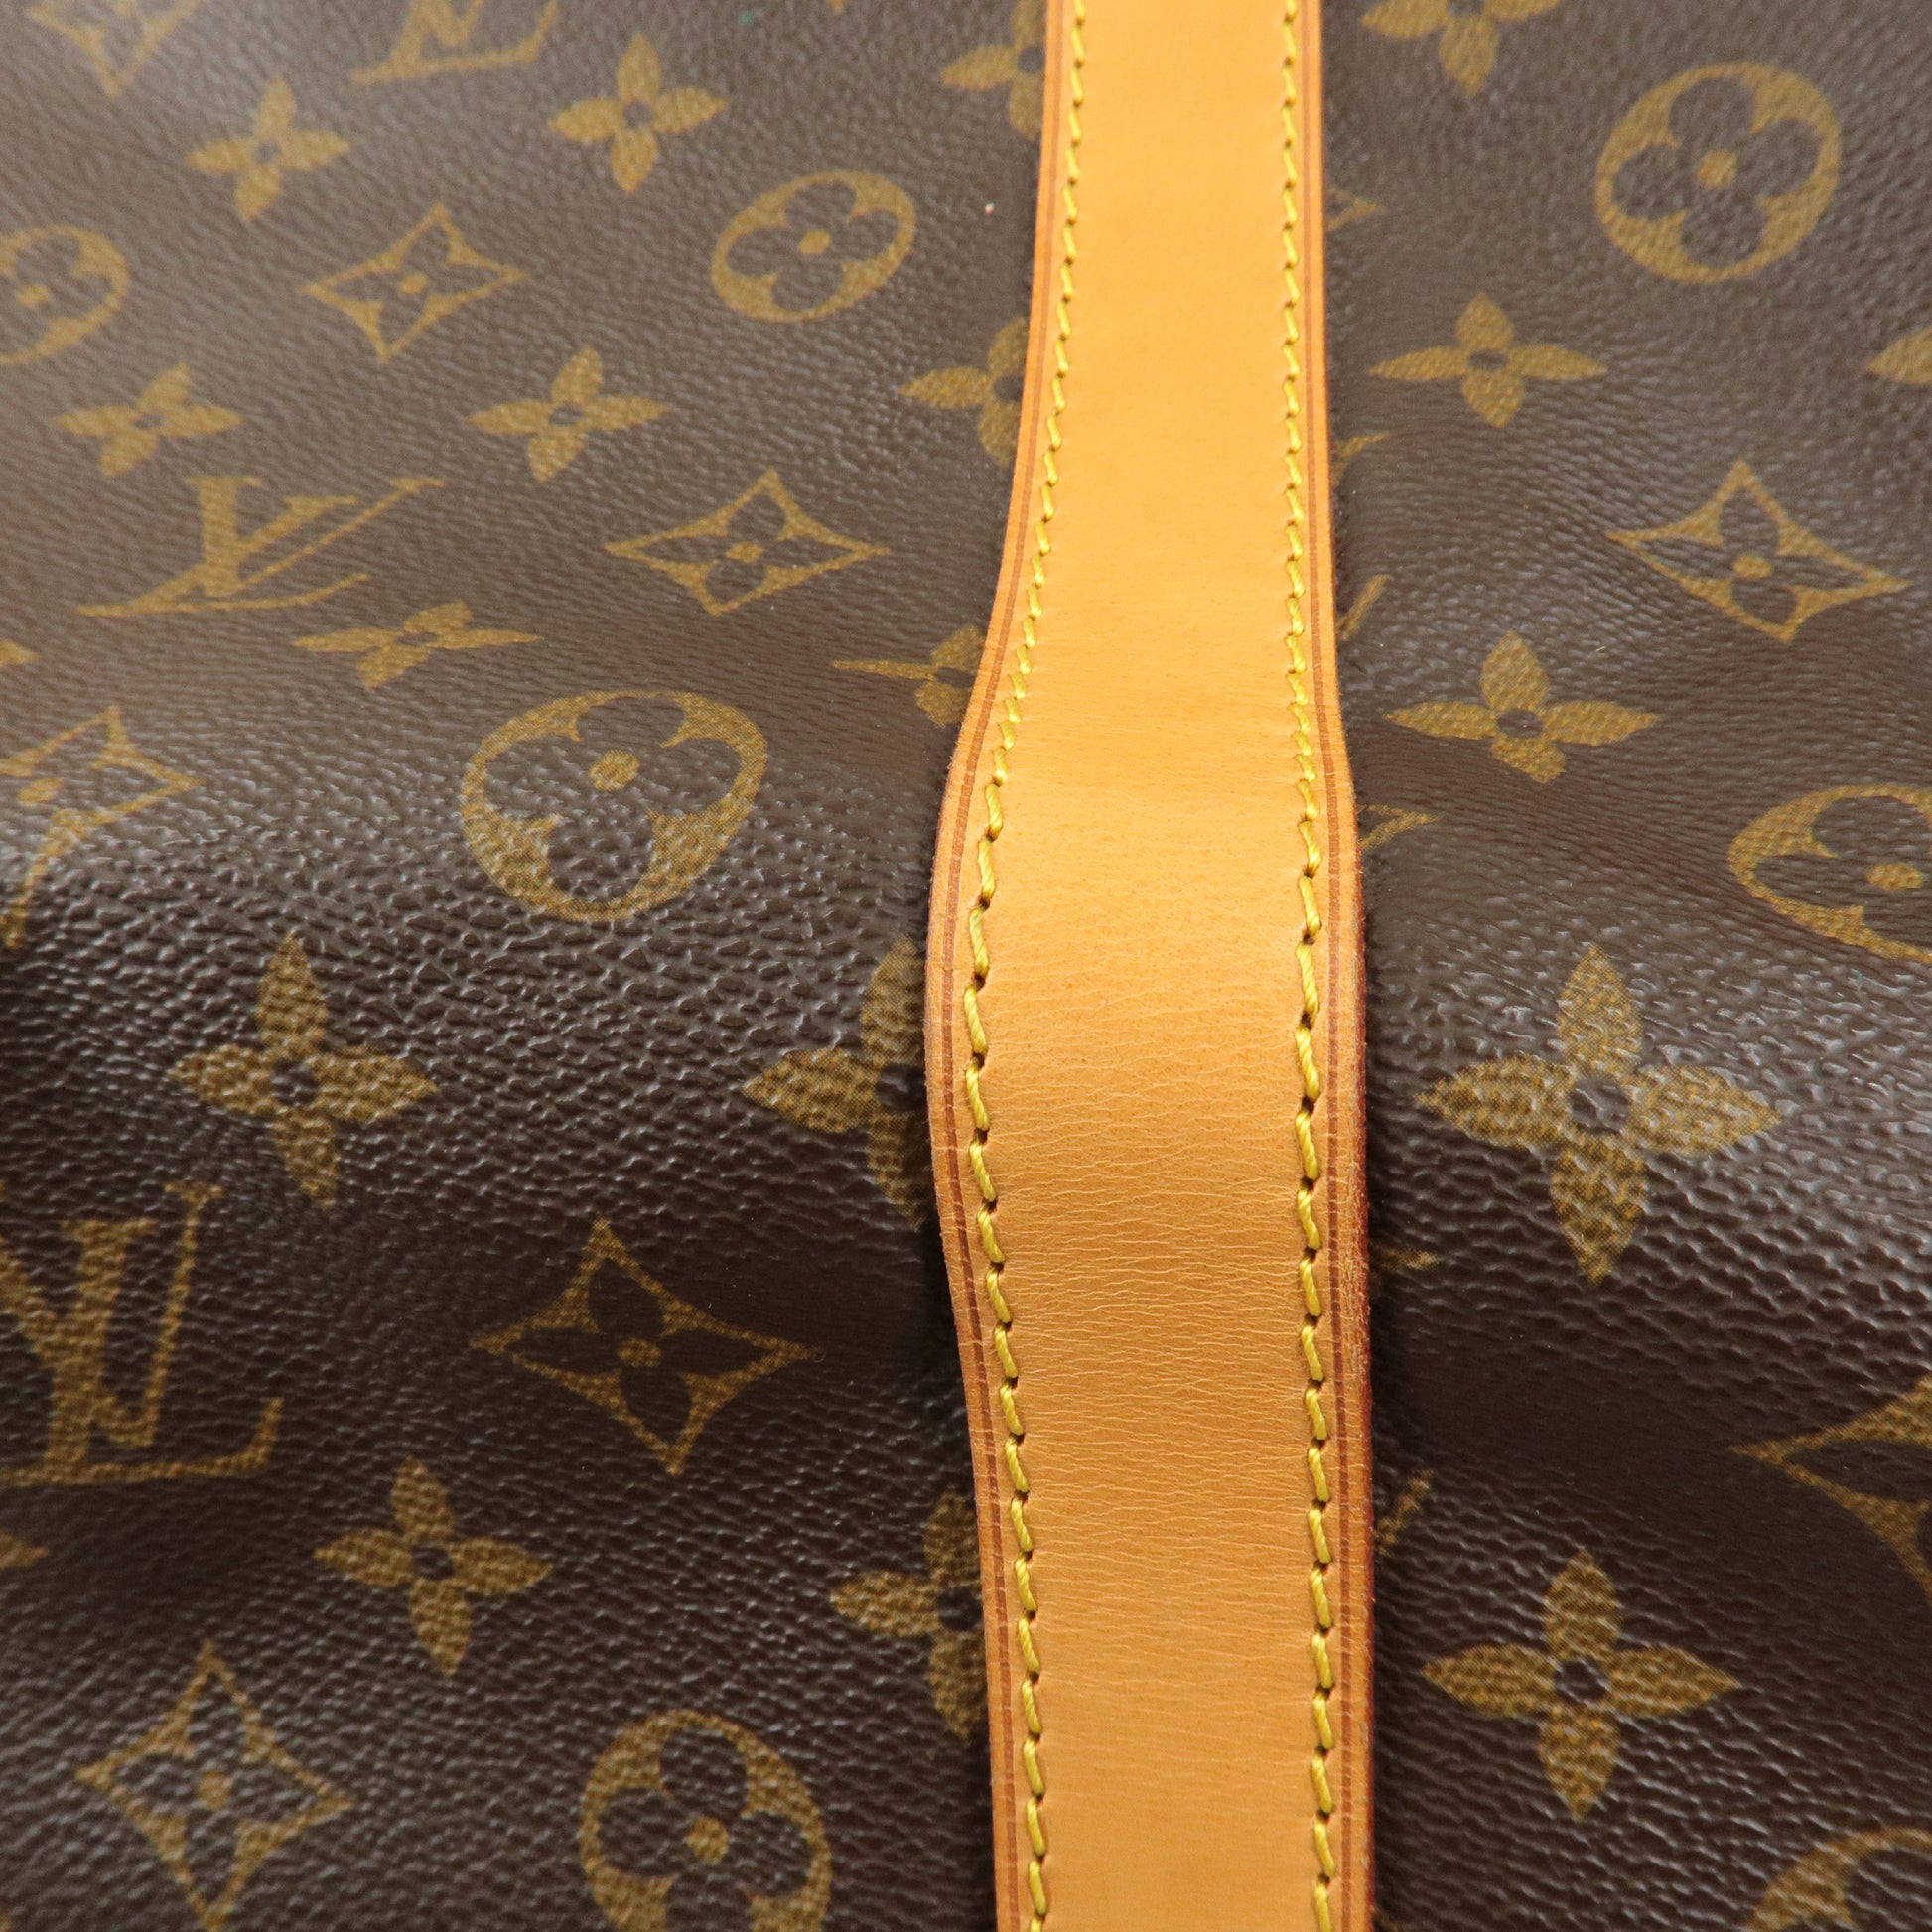 LOUIS VUITTON Keepall Bandouliere 60 Monogram M41412 Tophandle bag Brown  Leather